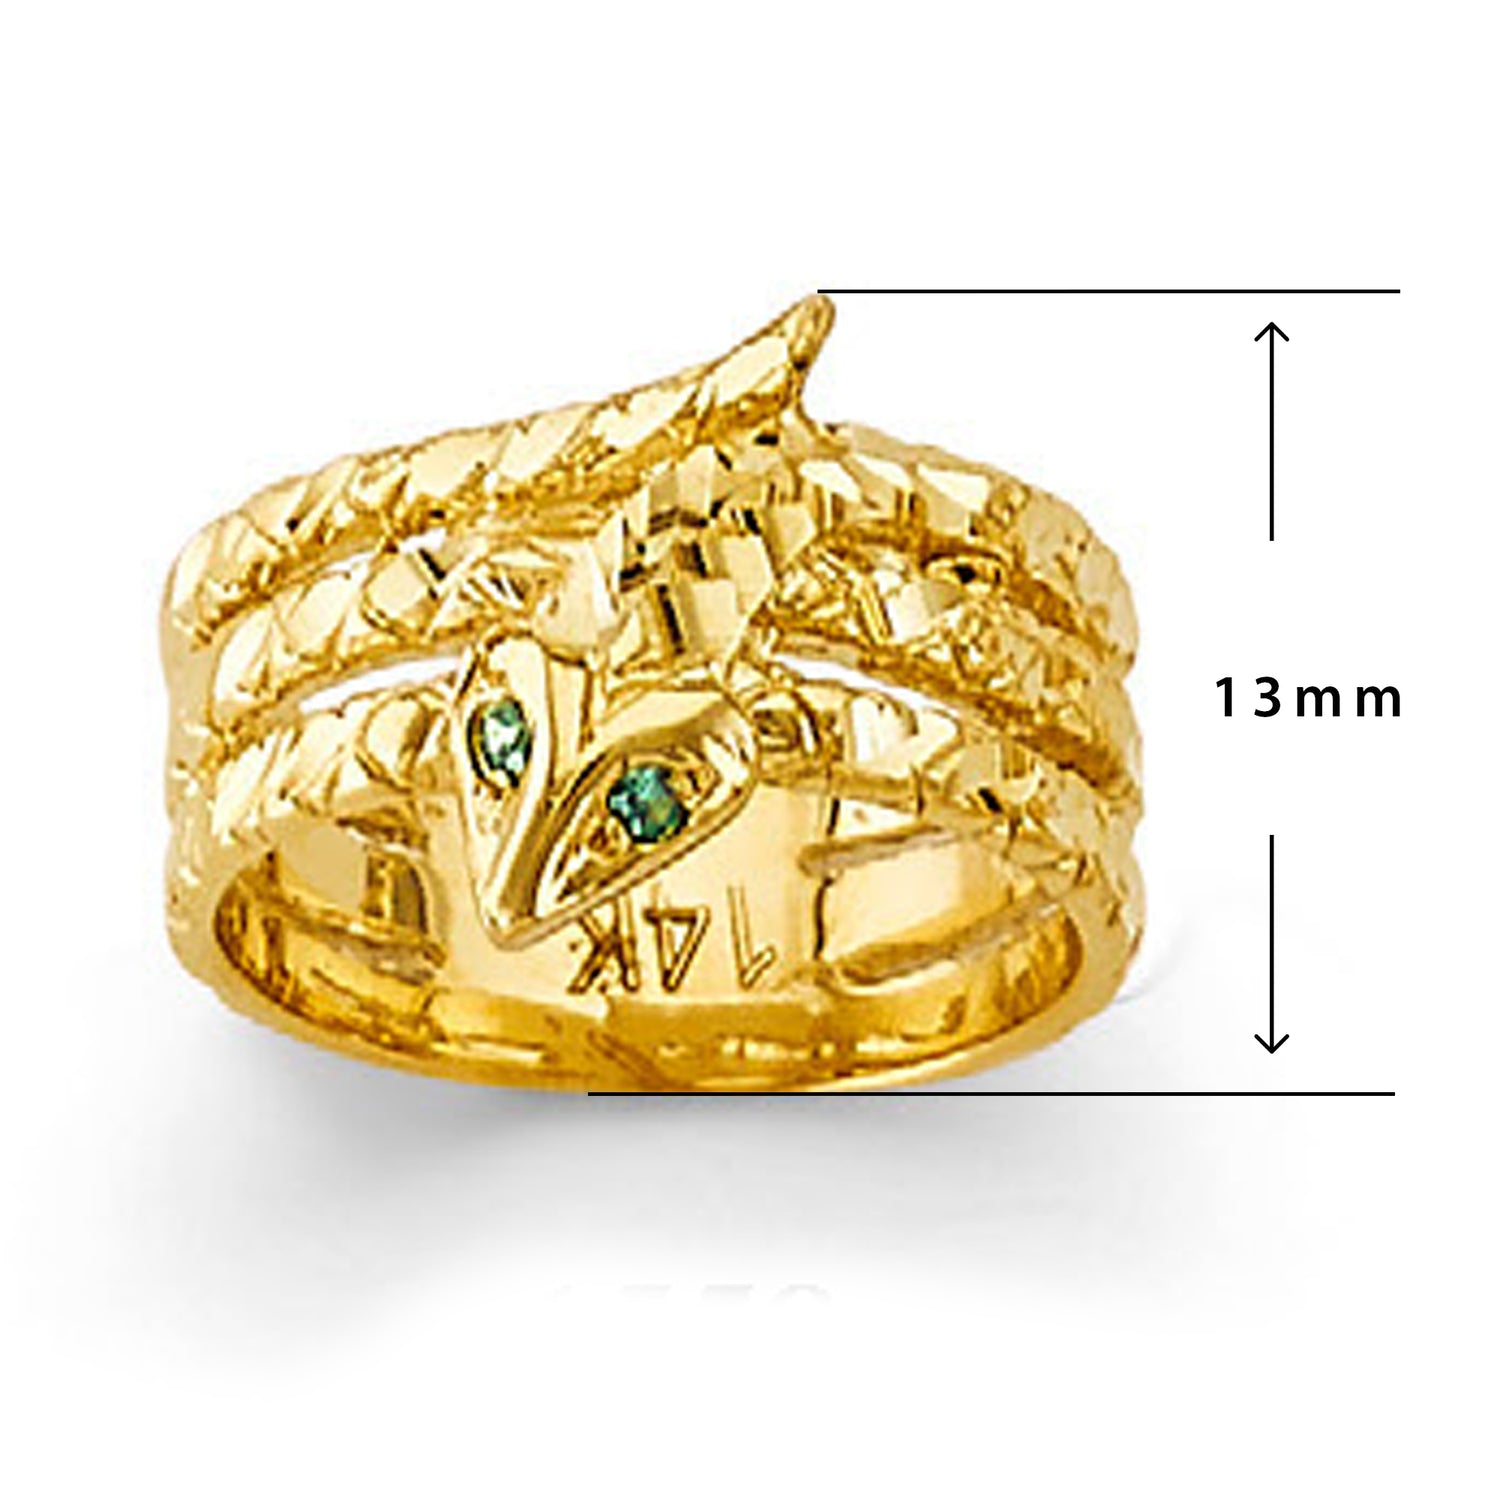 Emerald-eyed Serpent Ring in Solid Gold with Measurement